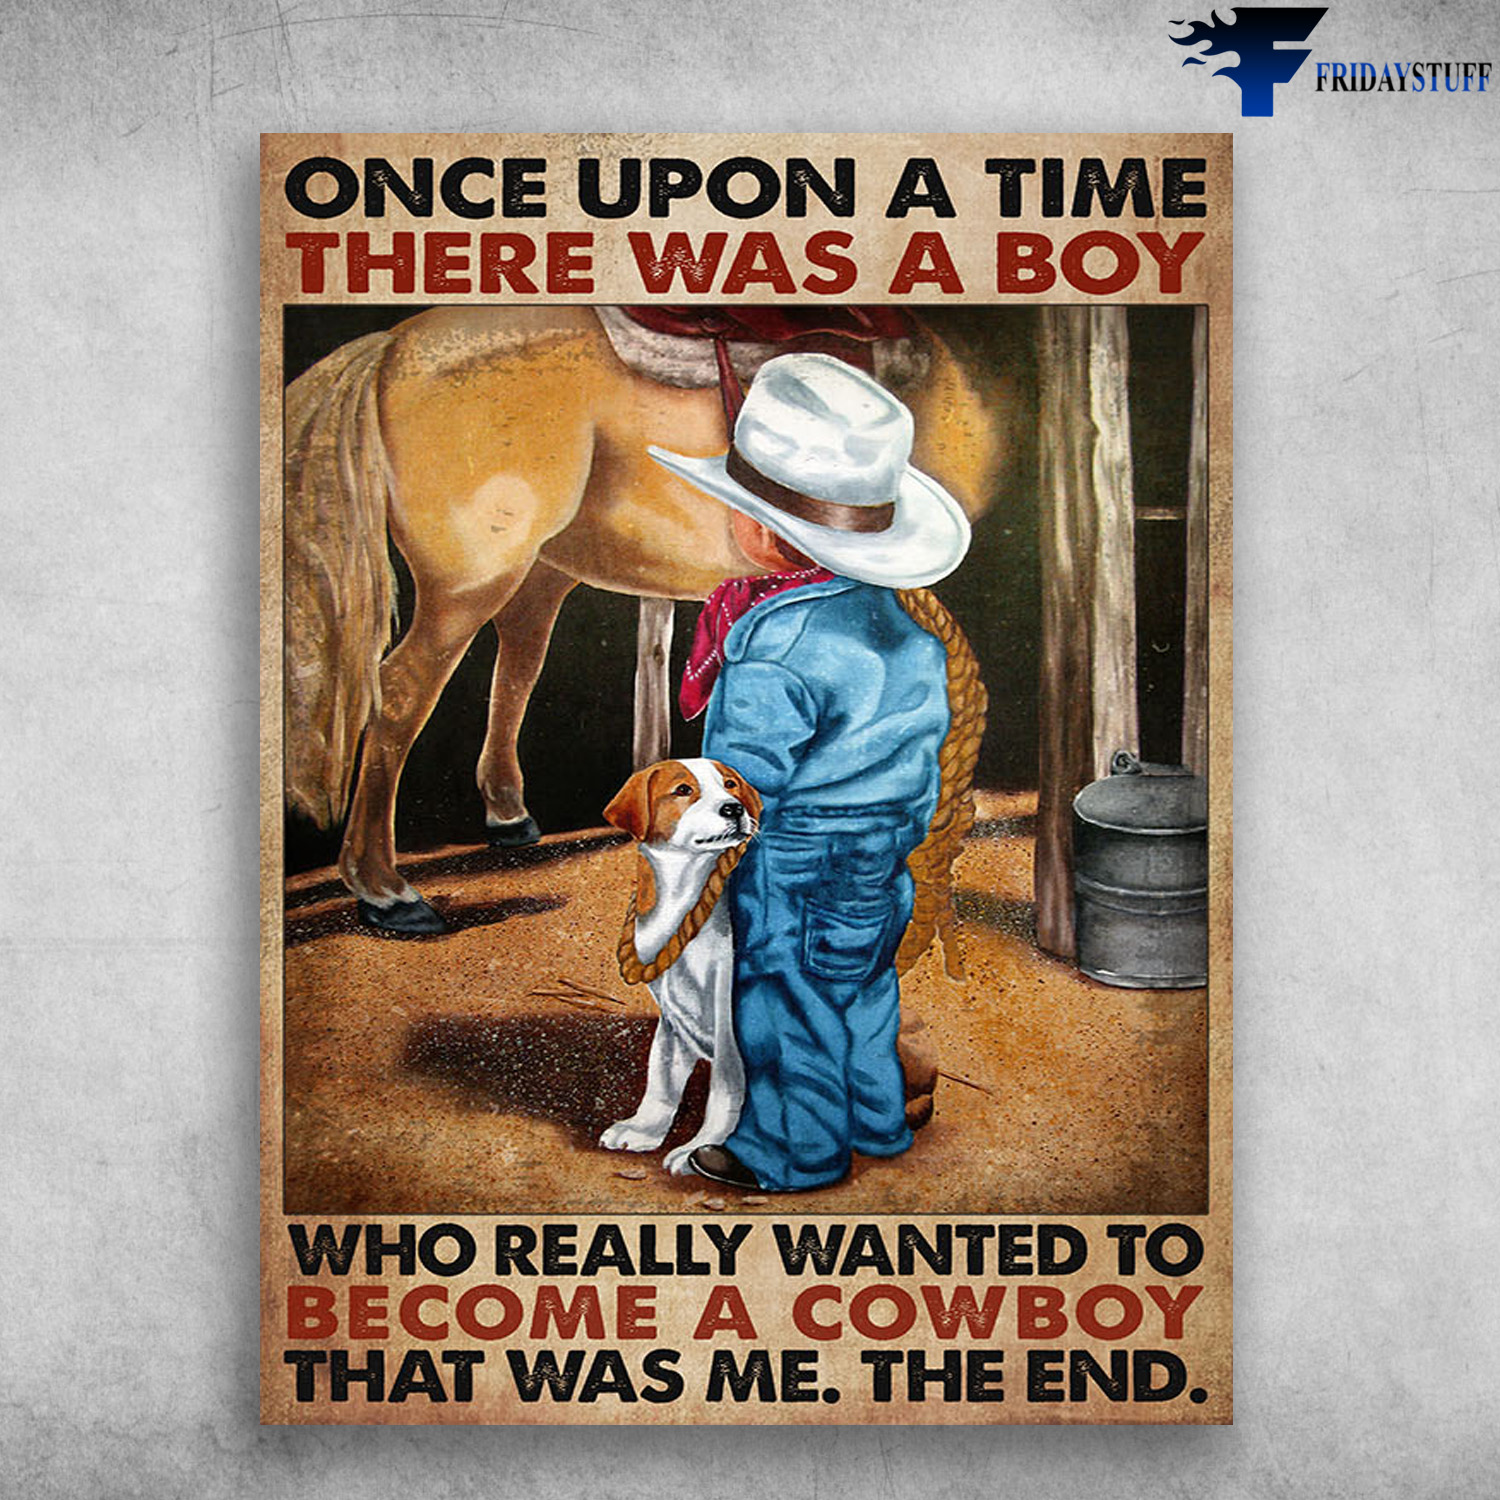 Cowboy And Dog, Horse Riding - Once Upon A Time, There Was A Boy, Who Really Wanted To Become A Cowboy, That Was Me, The End